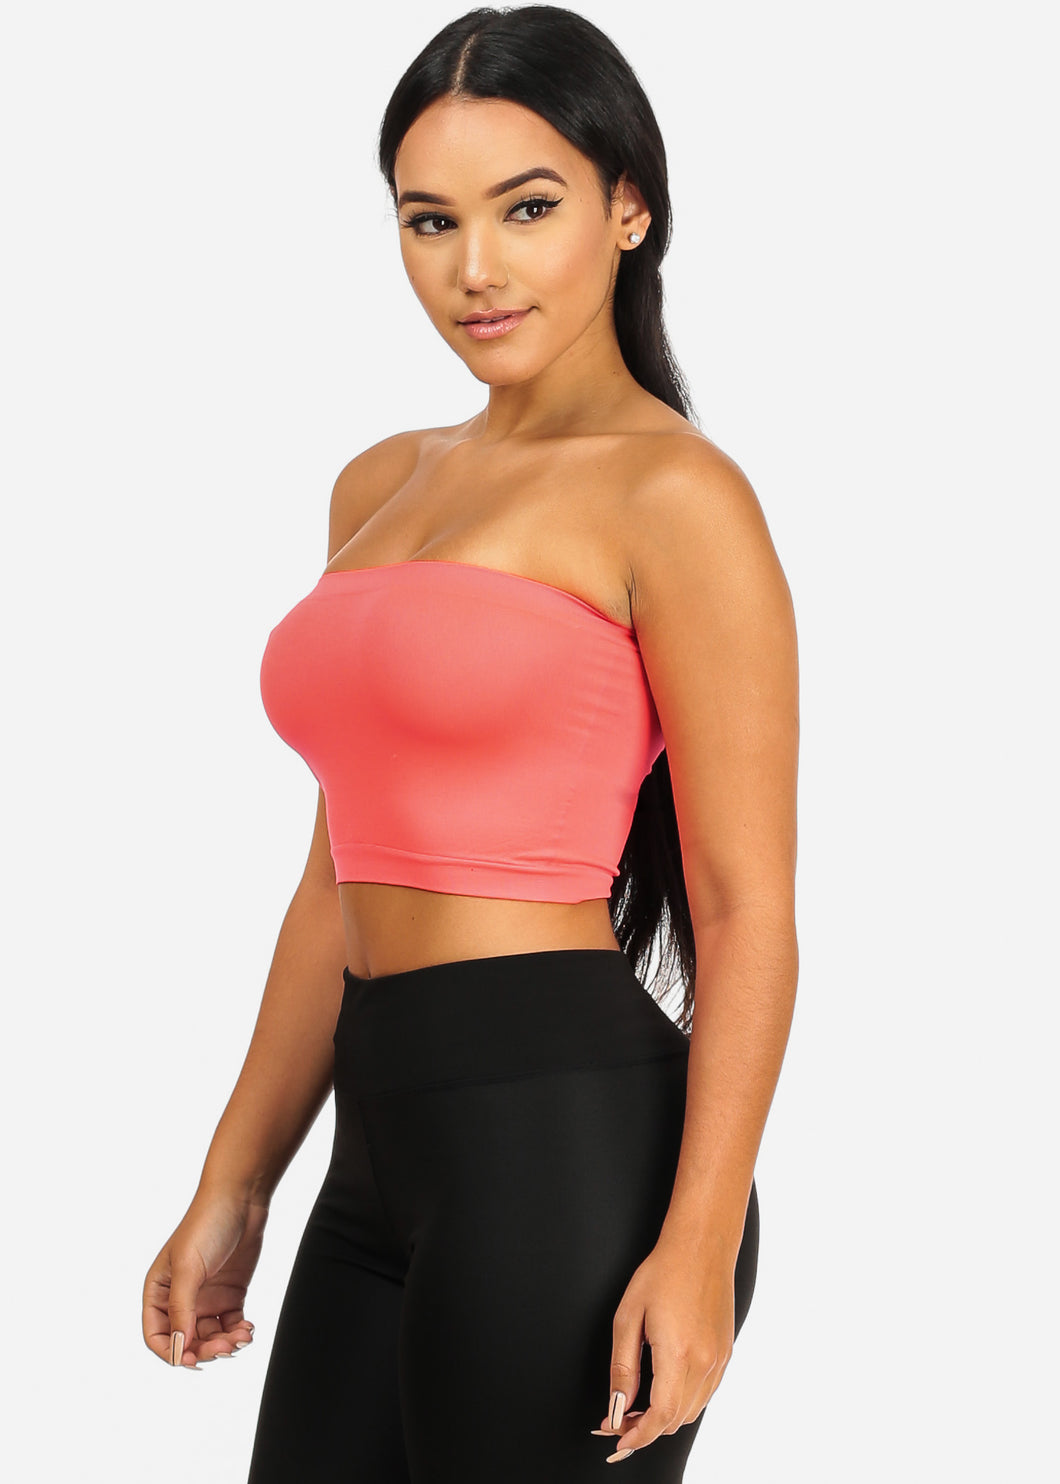 Strapless Women's Coral Tube Top One Size BRA-1115